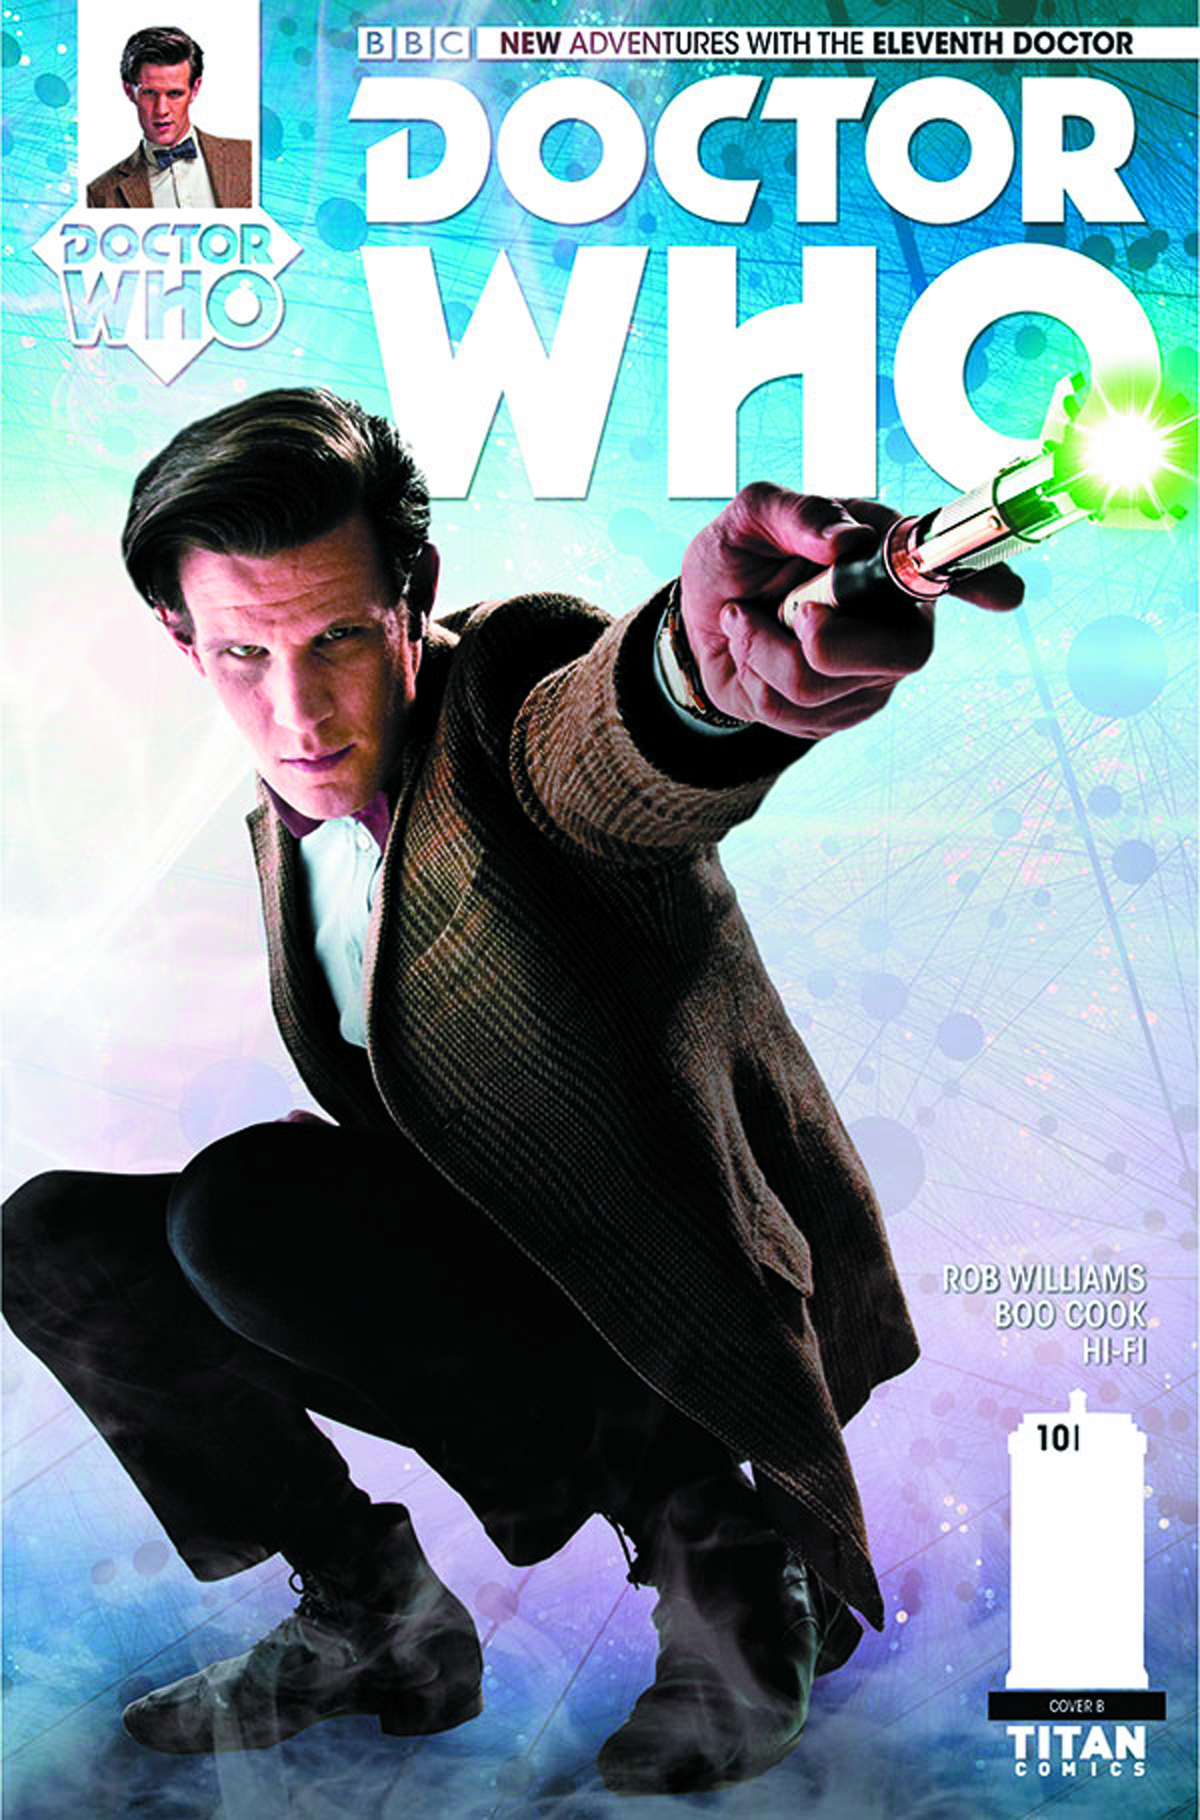 DOCTOR WHO 11TH #10 SUBSCRIPTION PHOTO